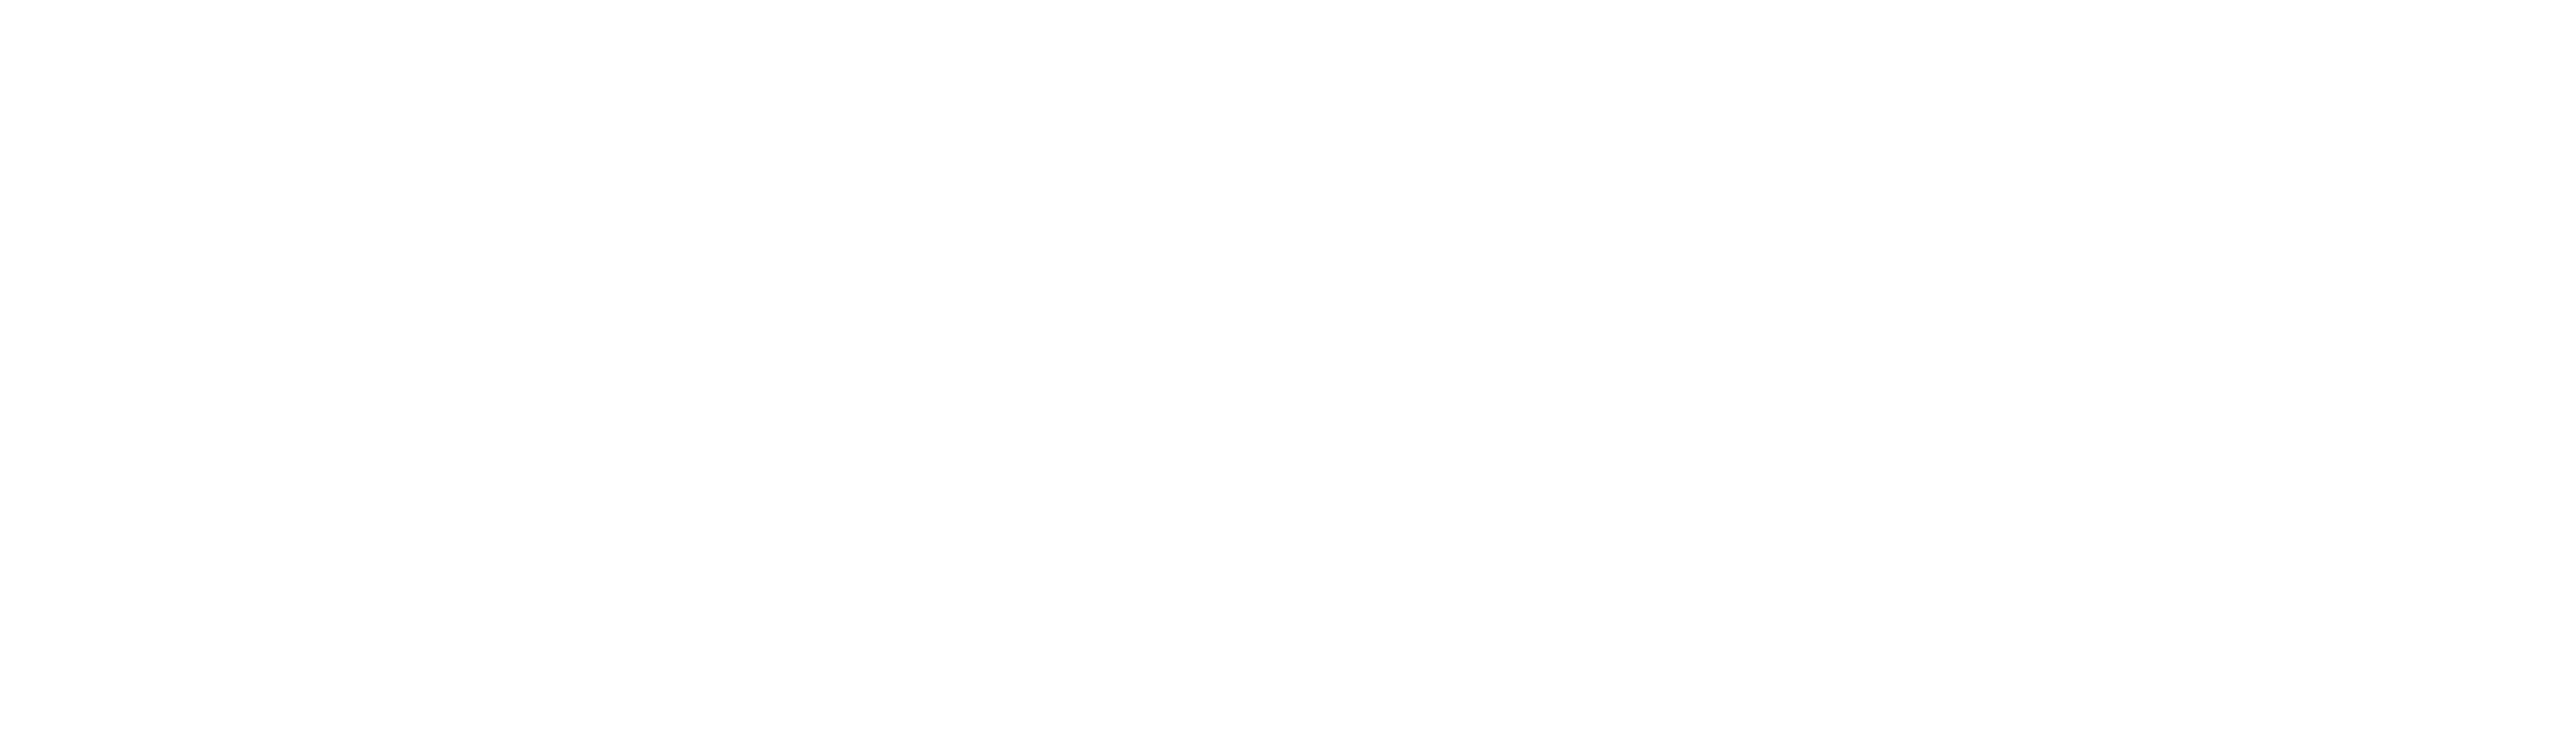 UK Martin-Gatton College of Agriculture, Food and Environment Center for Student Success Lockup